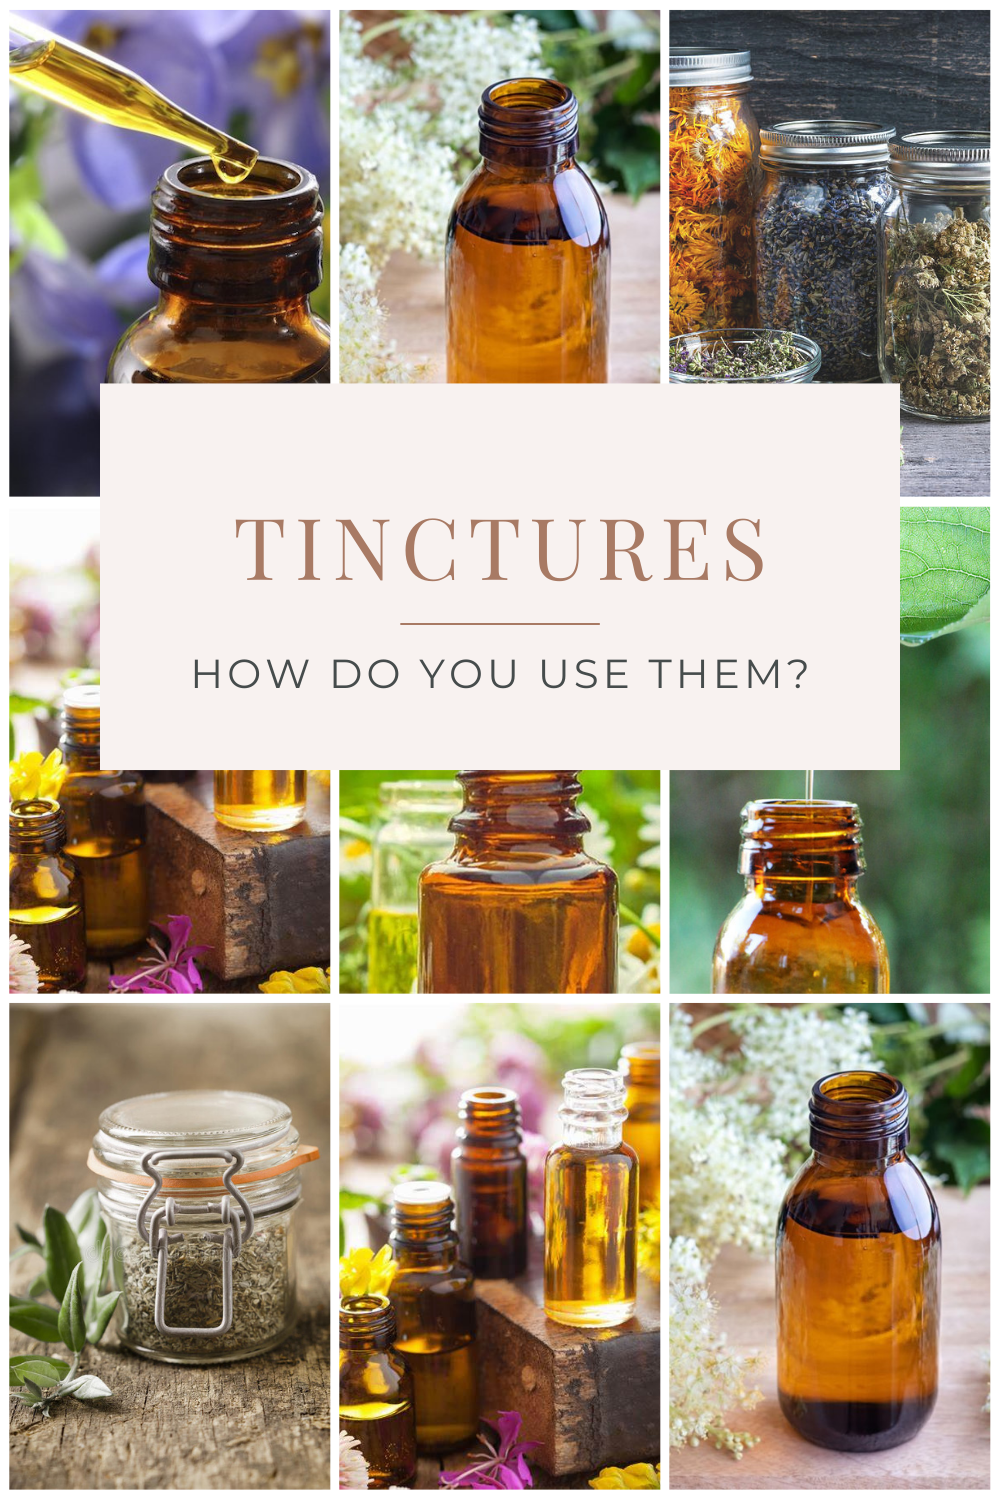 What is a Tincture? And how do you use them?